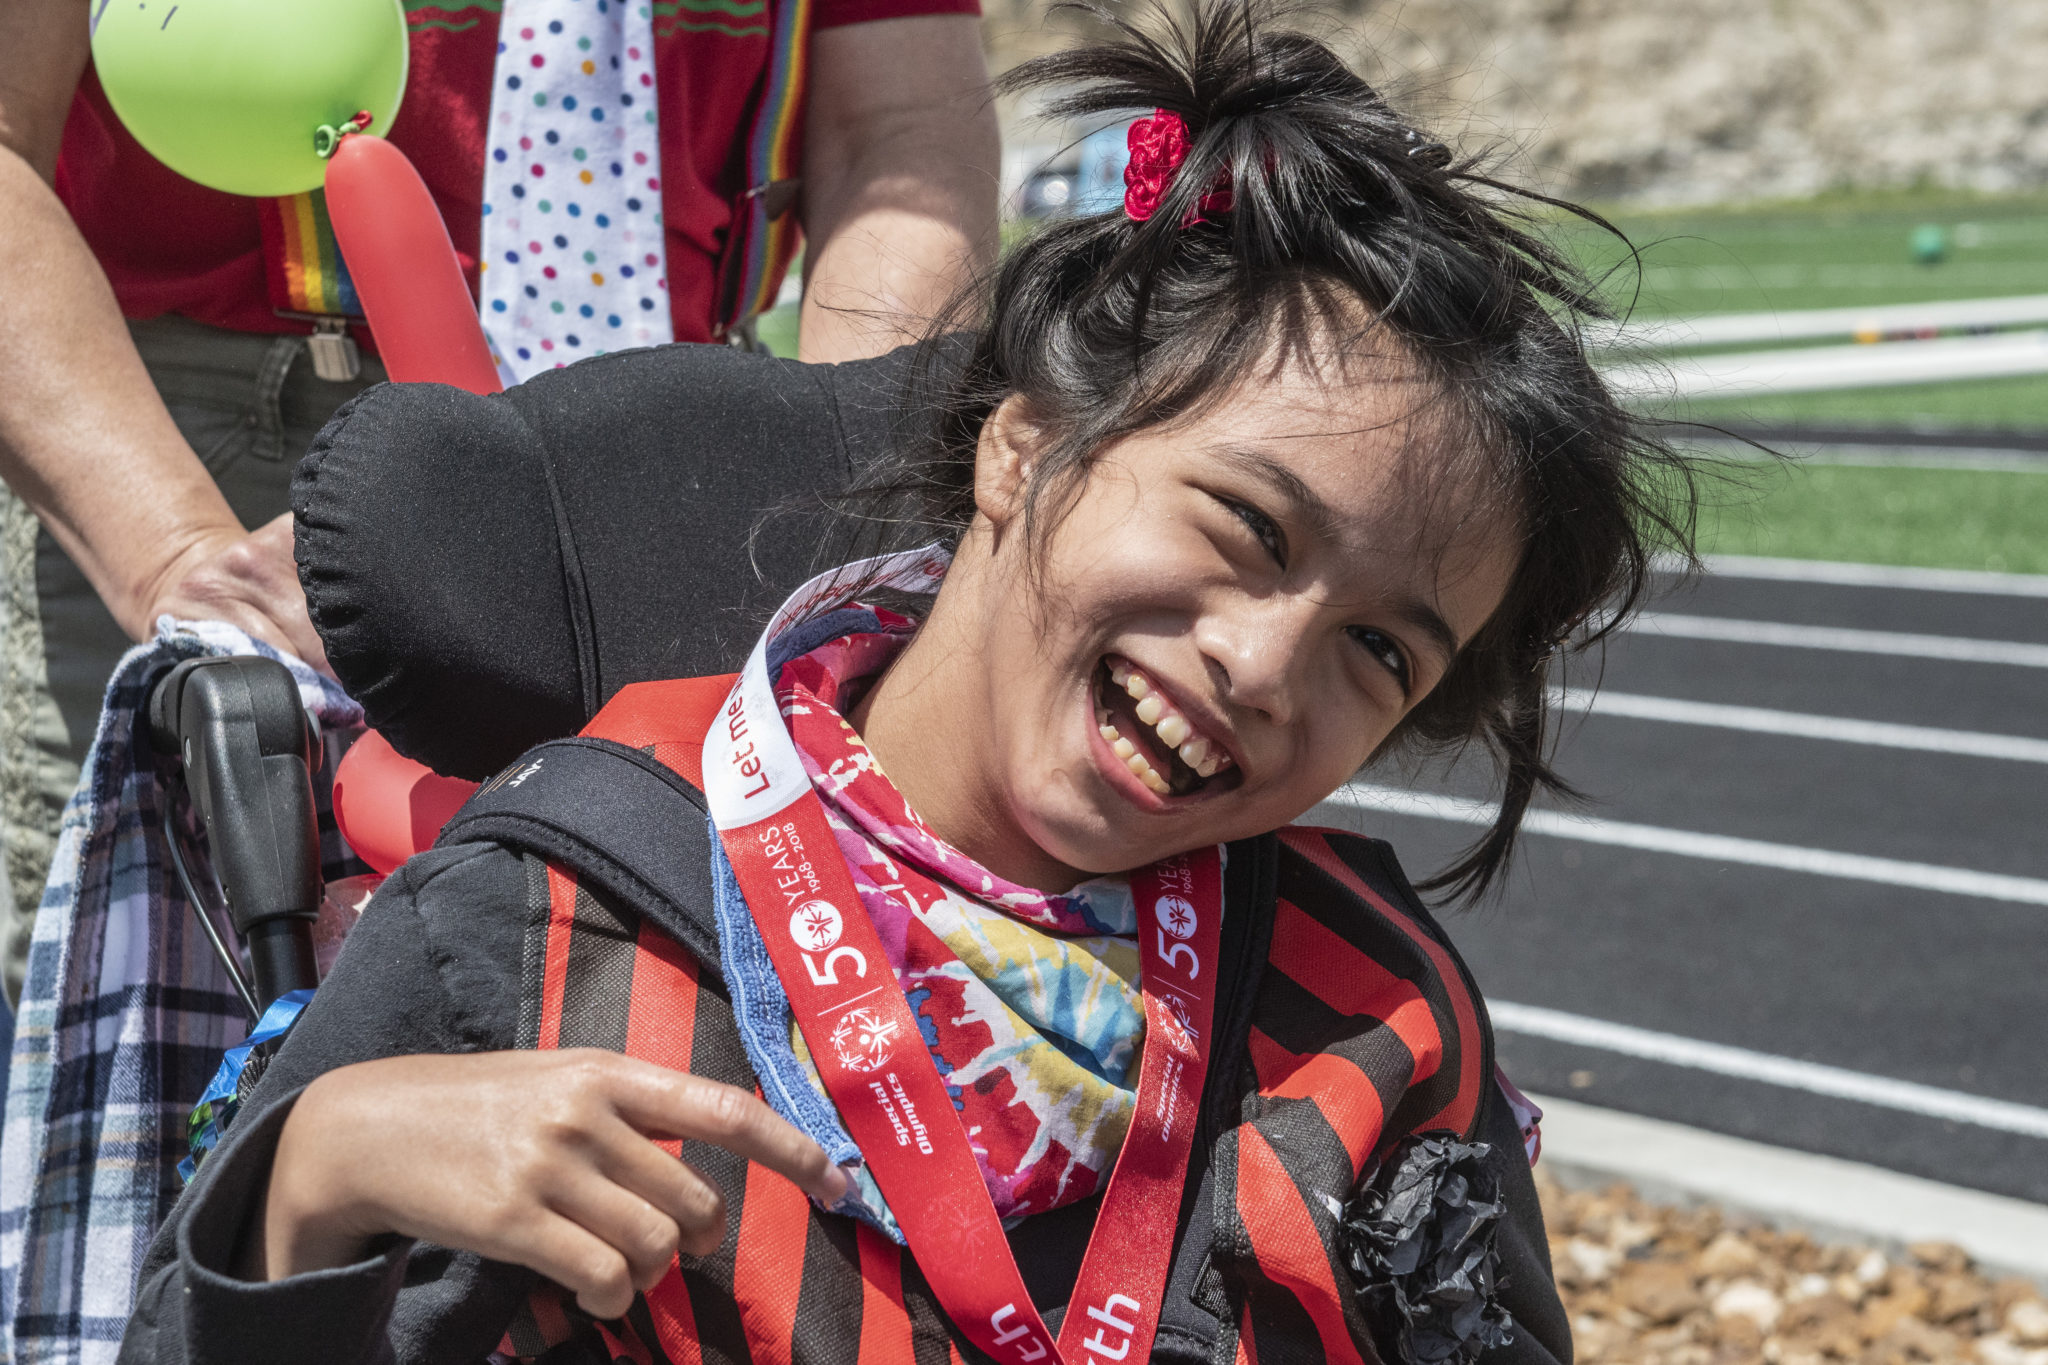 An athlete in a wheelchair wears a medal and smiles at the camera